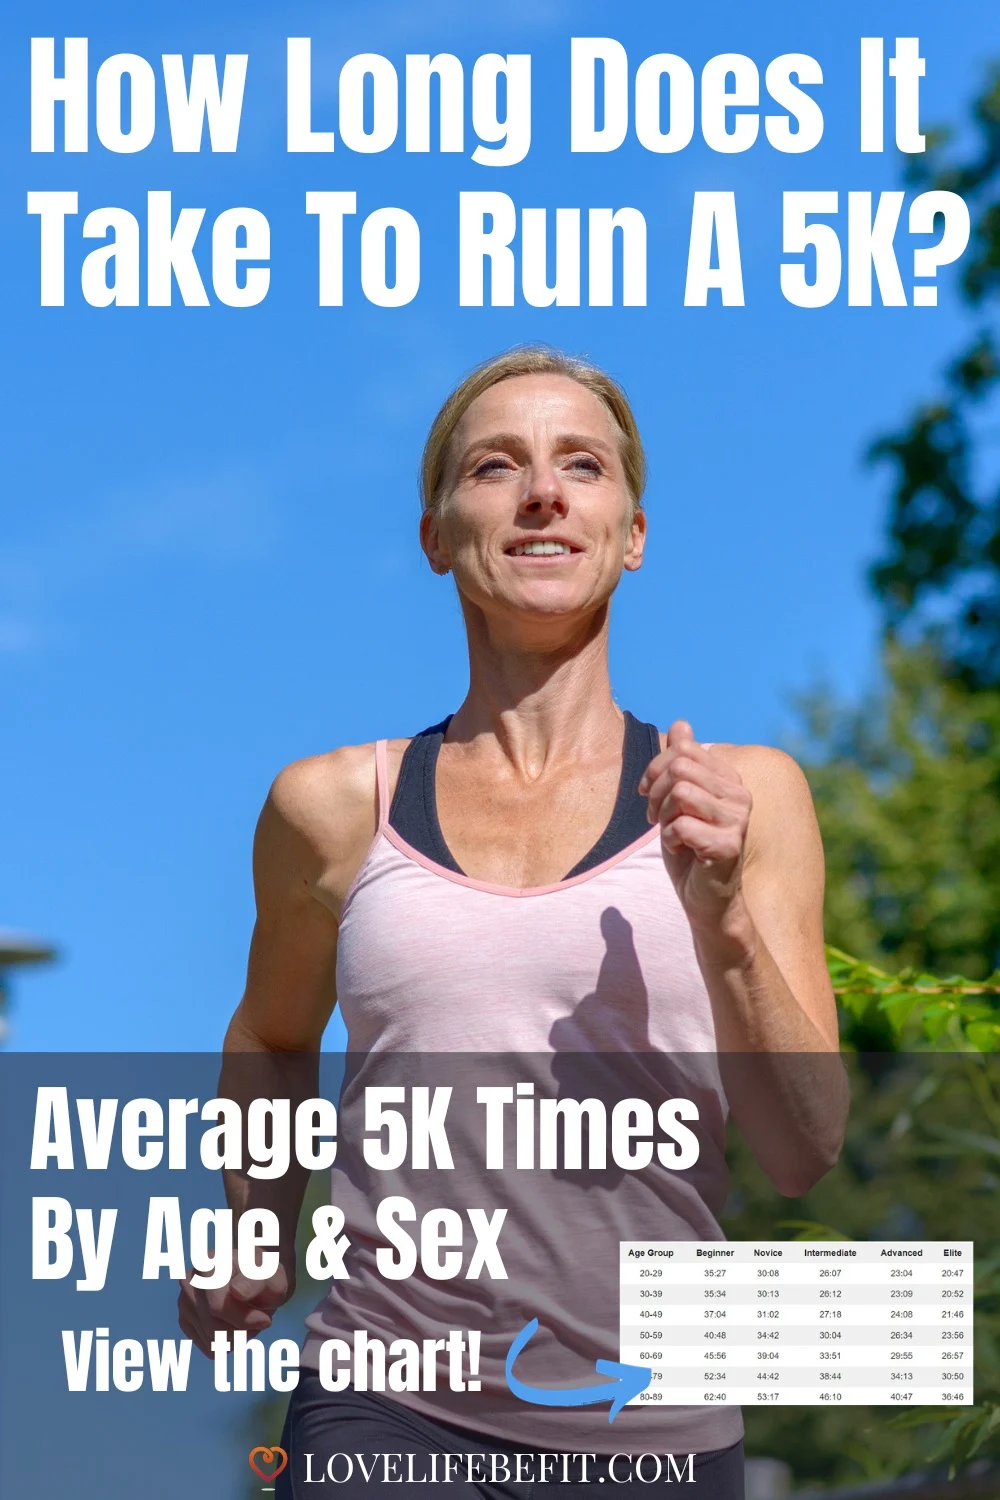 how long does it take to run a 5k?